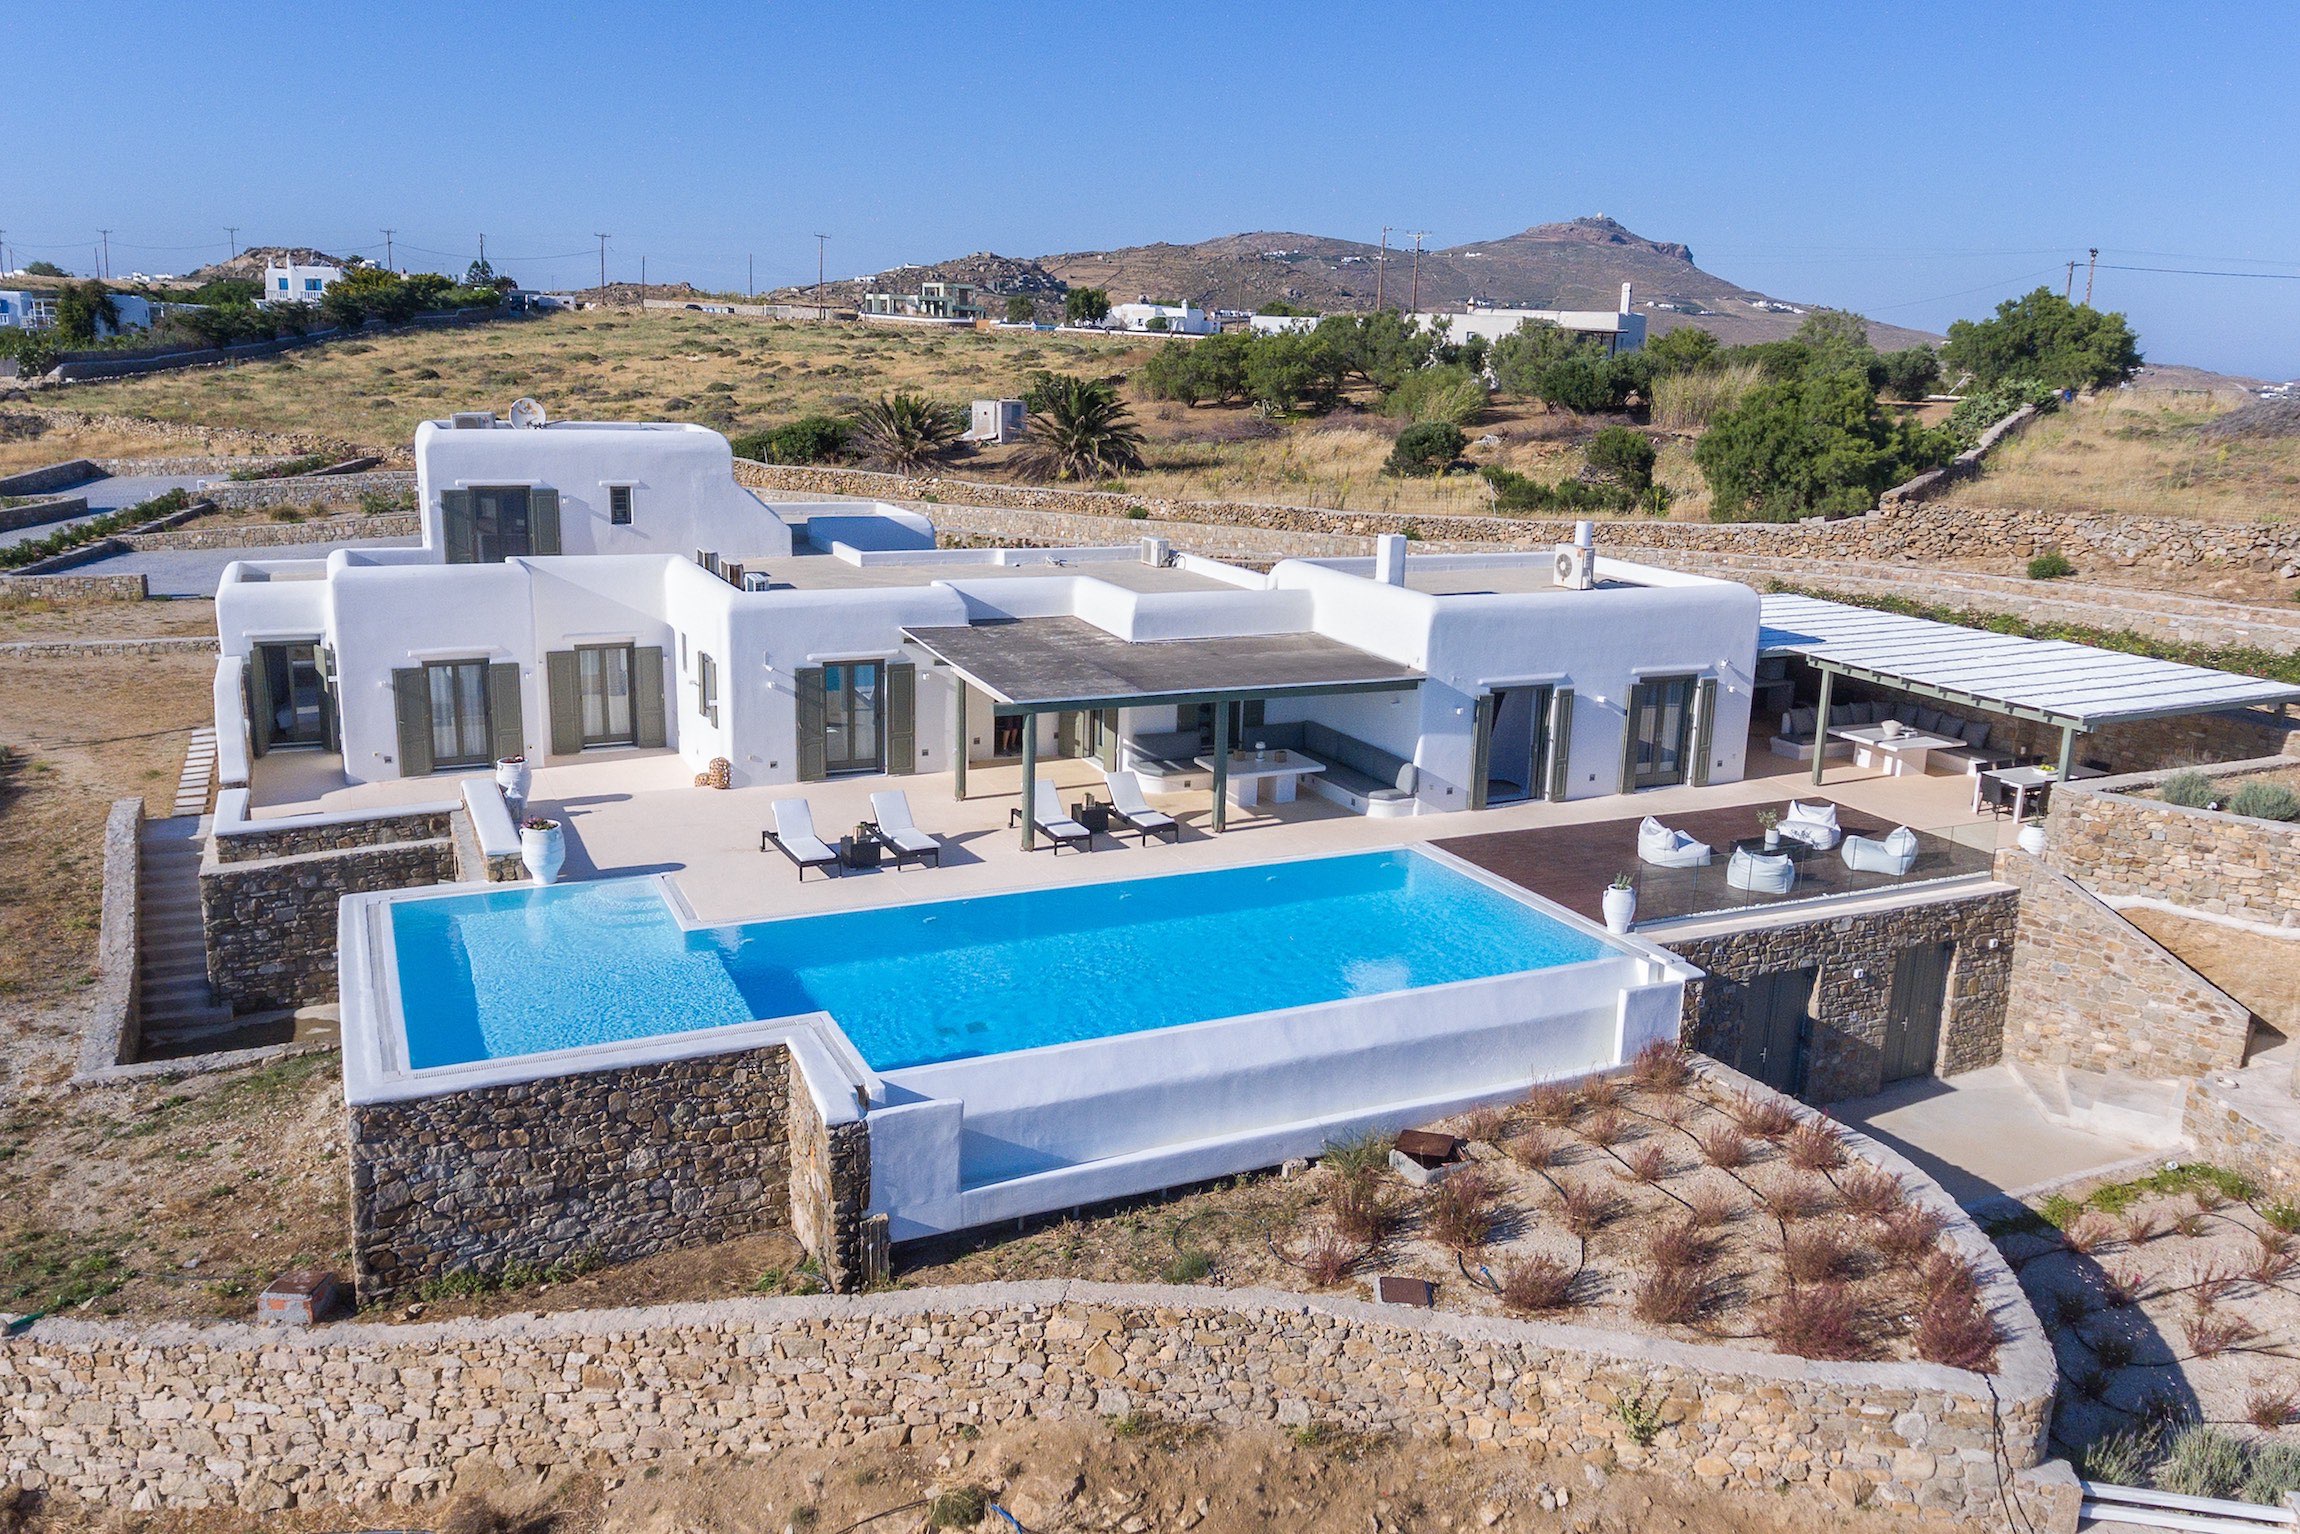 Ambrosial - Greece Sotheby's International Realty